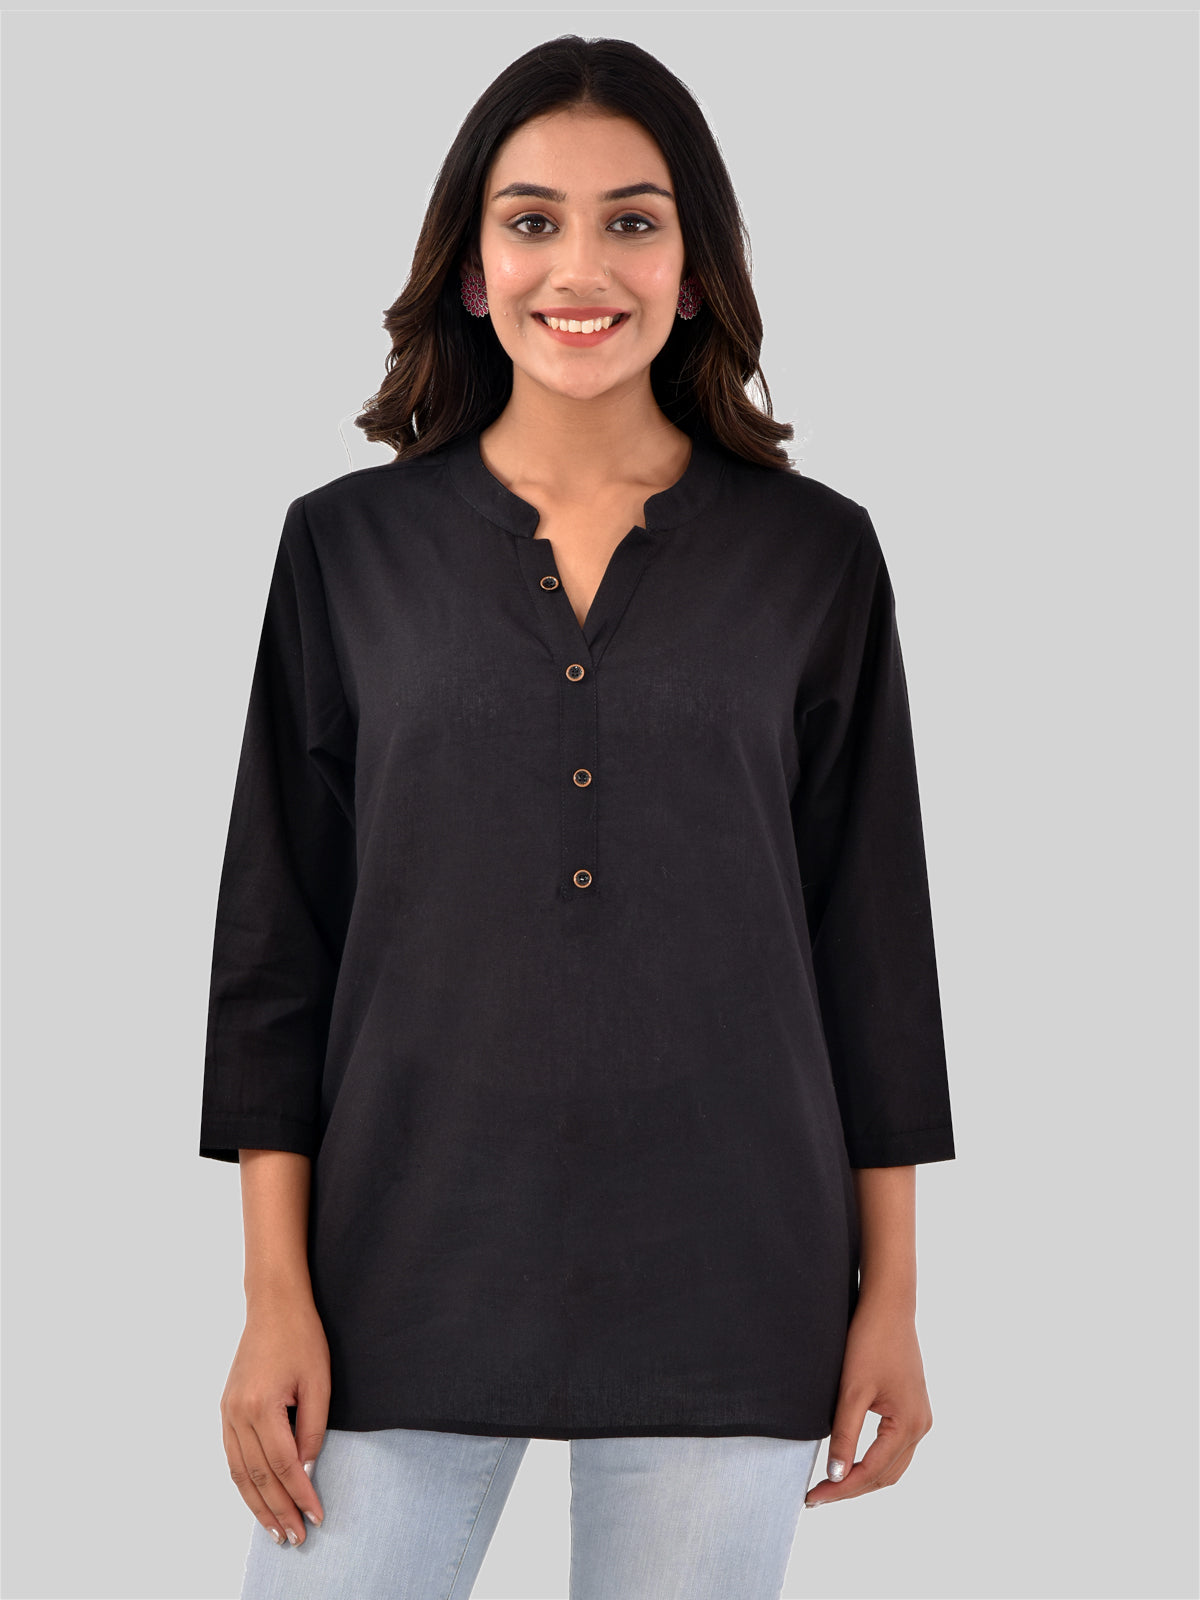 Womens Casual Three Fourth Sleeves Solid Black Cotton Tops